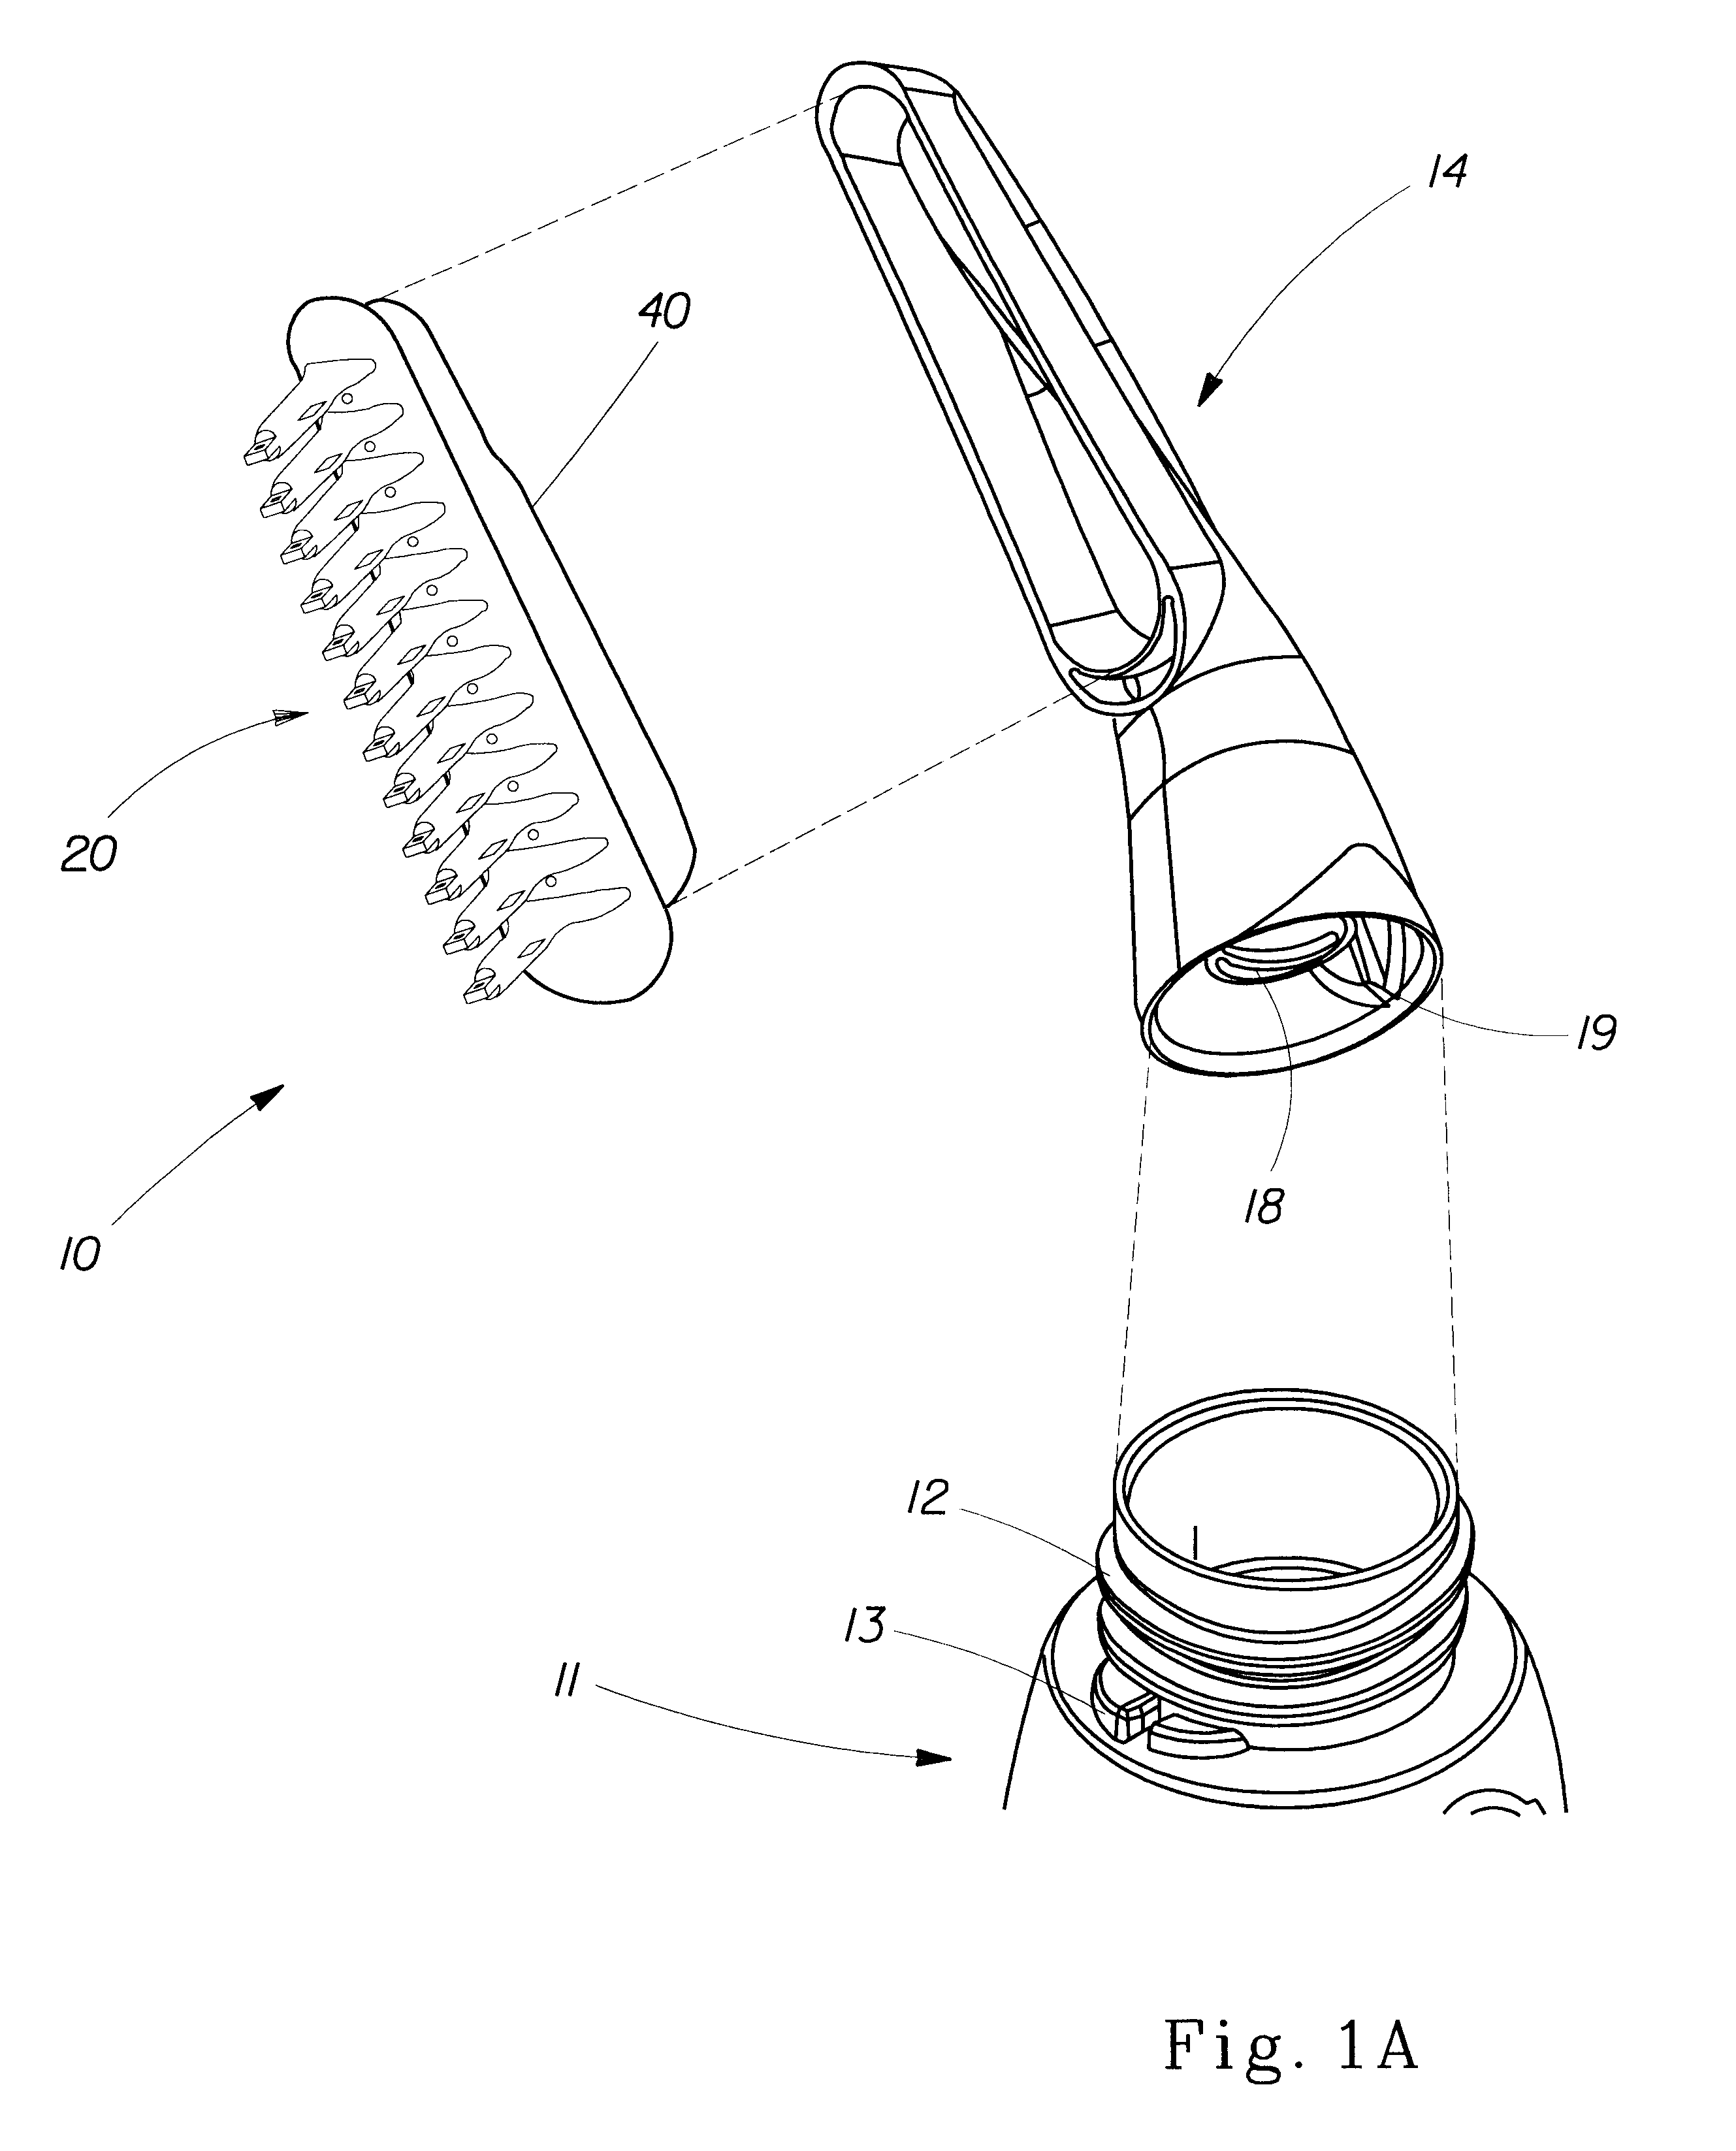 Applicator for applying liquid products to hair